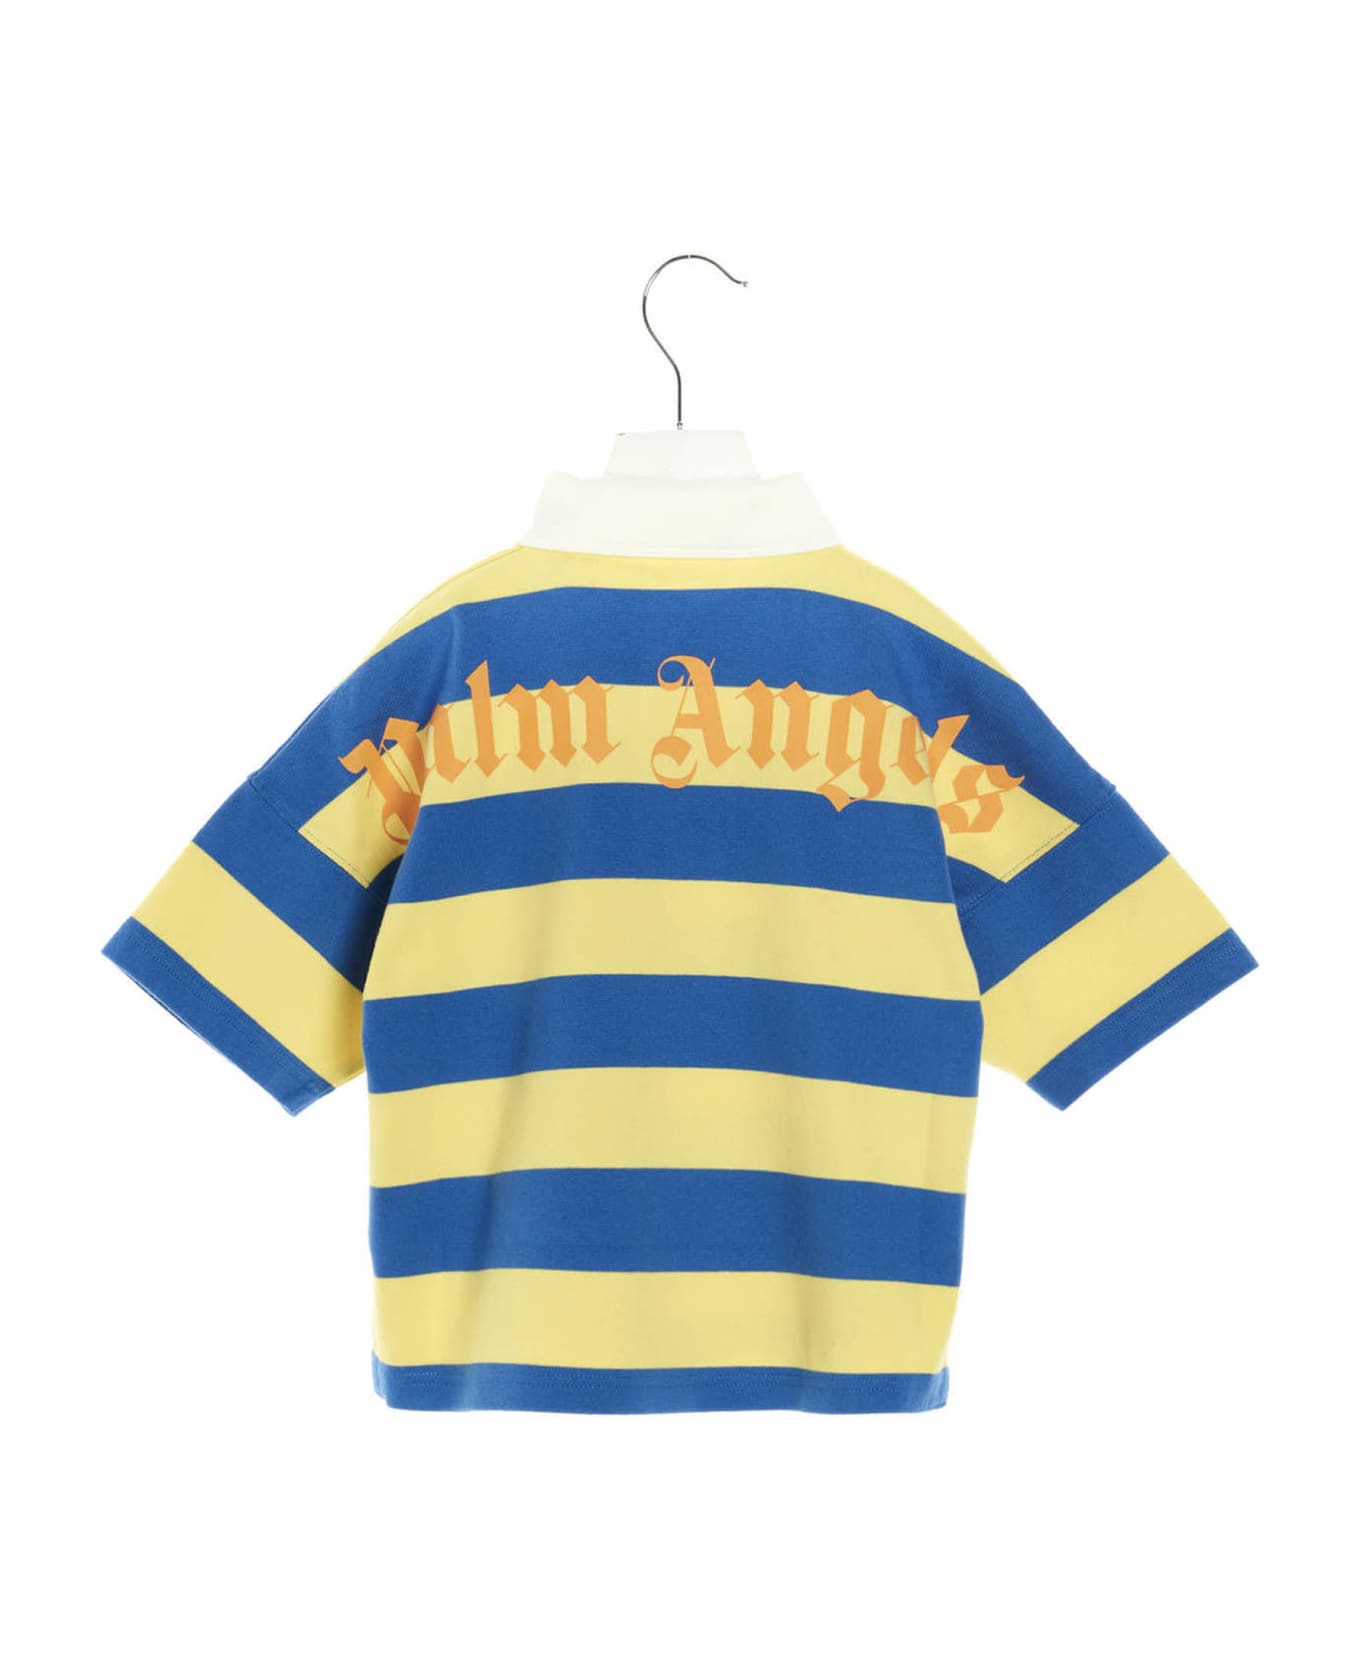 Palm Angels Striped Polo Shirt - Multicolor